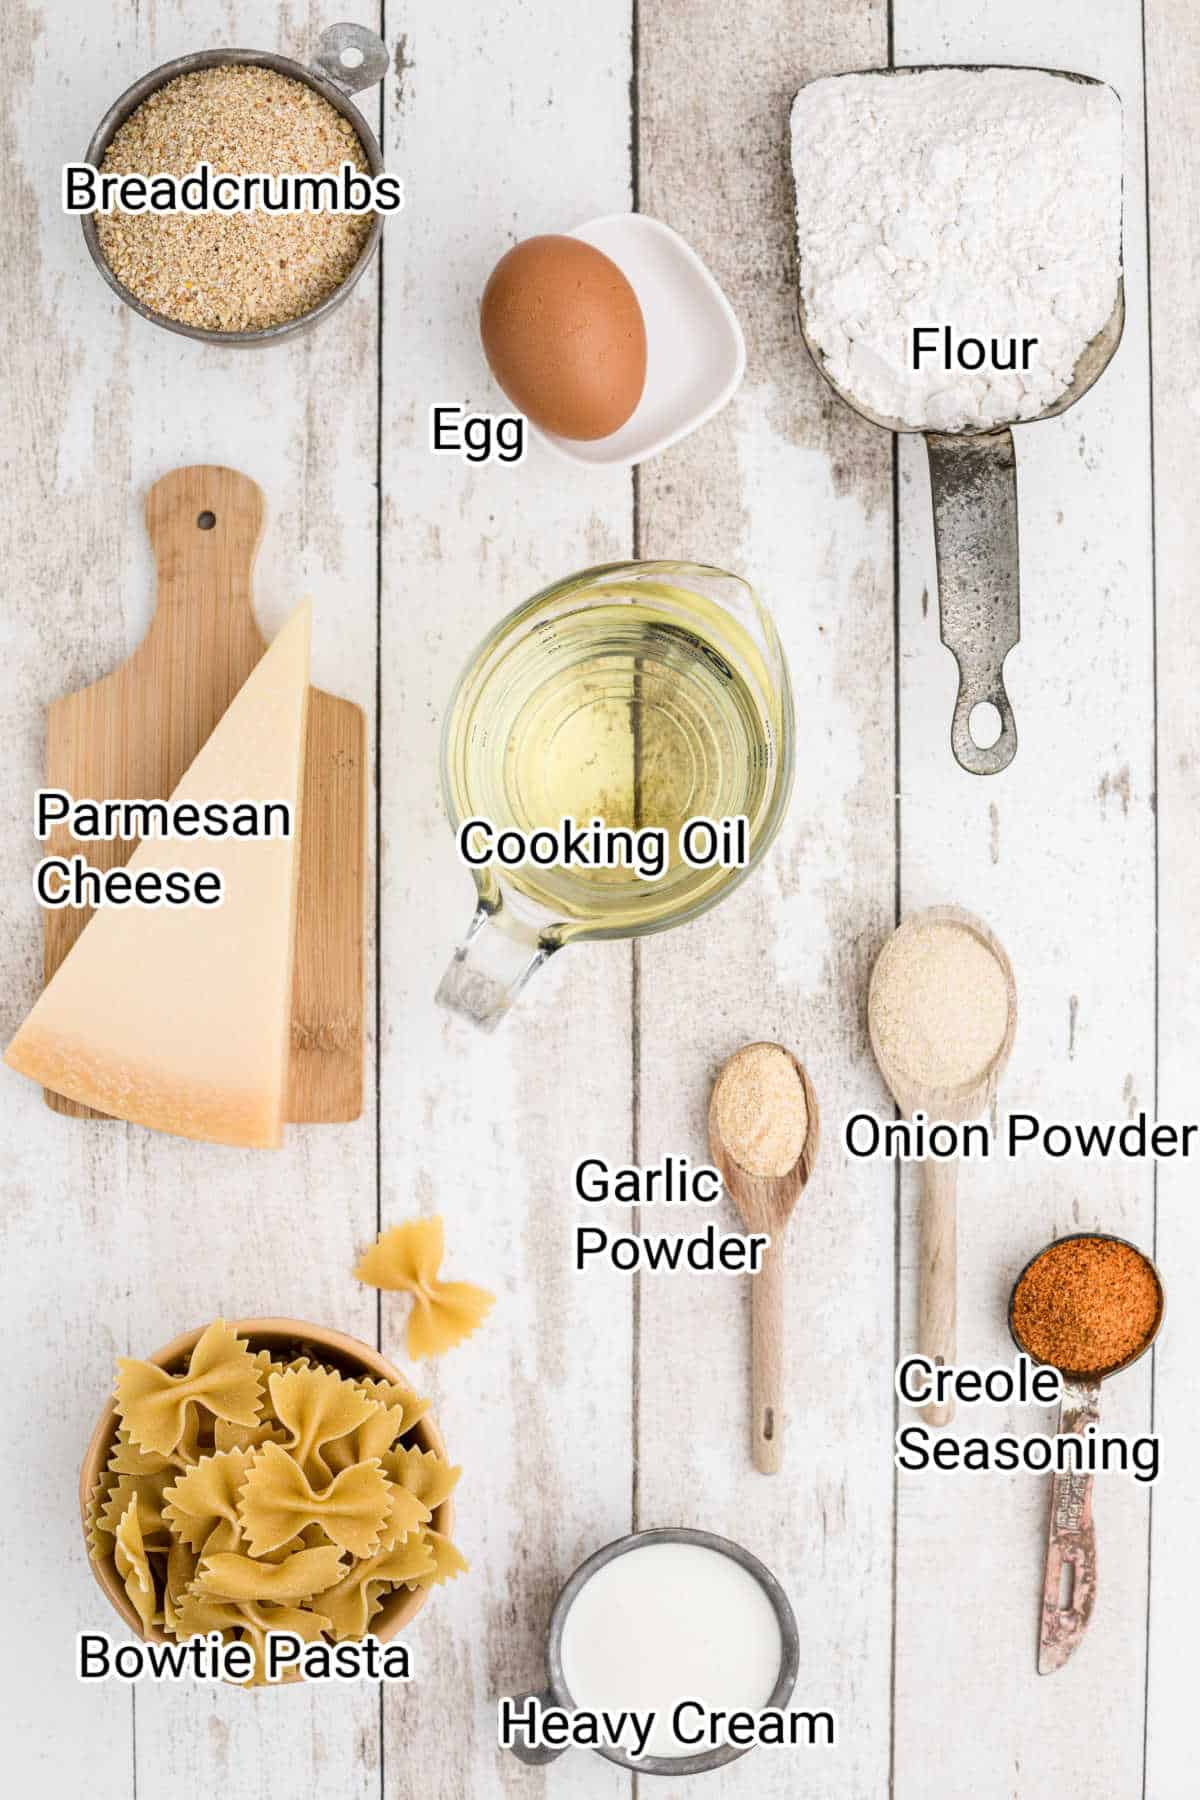 ingredients needed to make fried bowtie pasta - ingredients all laid out